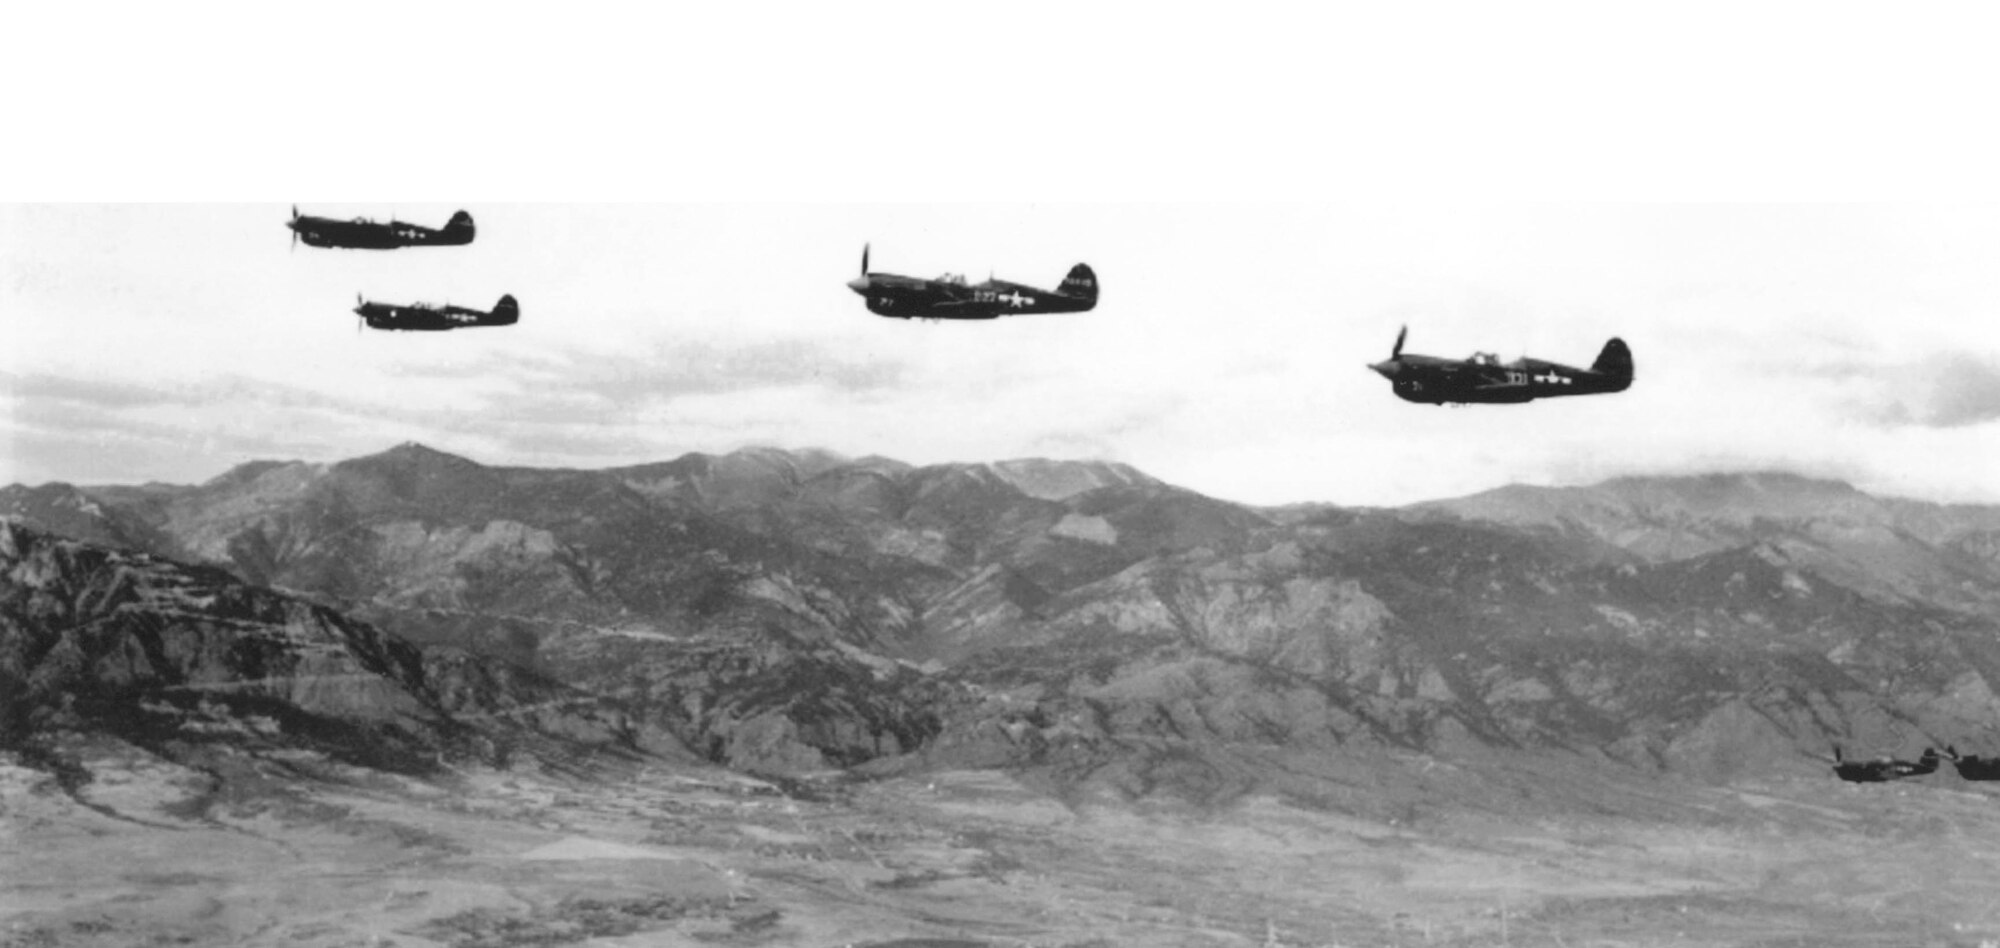 A formation of P-40 “Warhawk” fighters passes along the Front Range in 1944.  The Peterson Museum has a replica of this aircraft type on display at the corner of Peterson Boulevard and Ent Avenue. (U.S. Air Force photo)